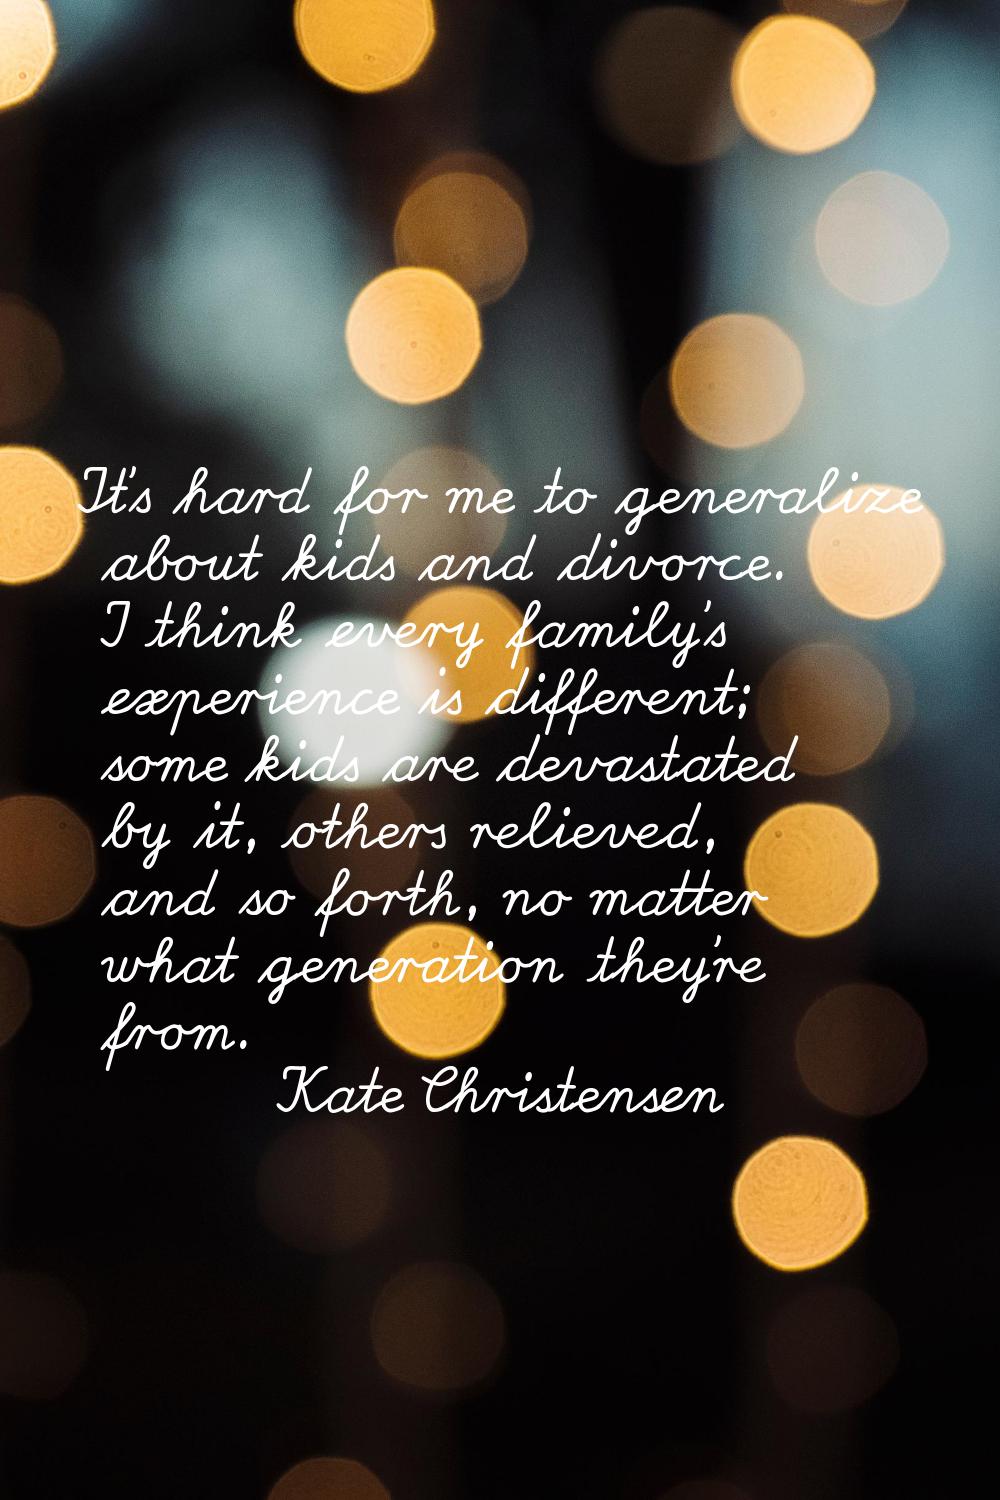 It's hard for me to generalize about kids and divorce. I think every family's experience is differe